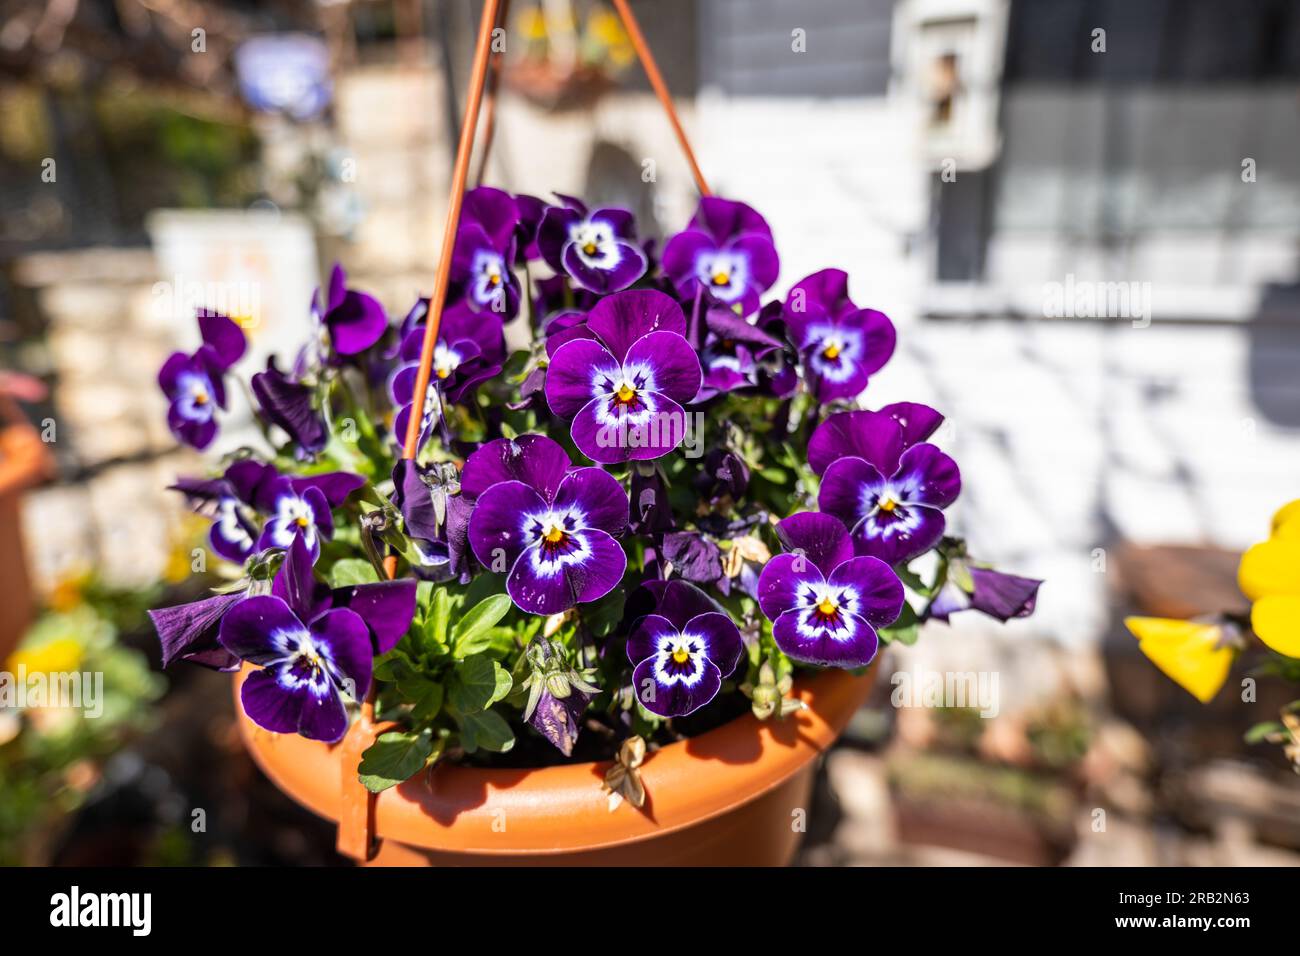 Decorative flower pots with spring flowers viola cornuta in vibrant violet. purple yellow pansies in flower pots hanging in a garden Stock Photo